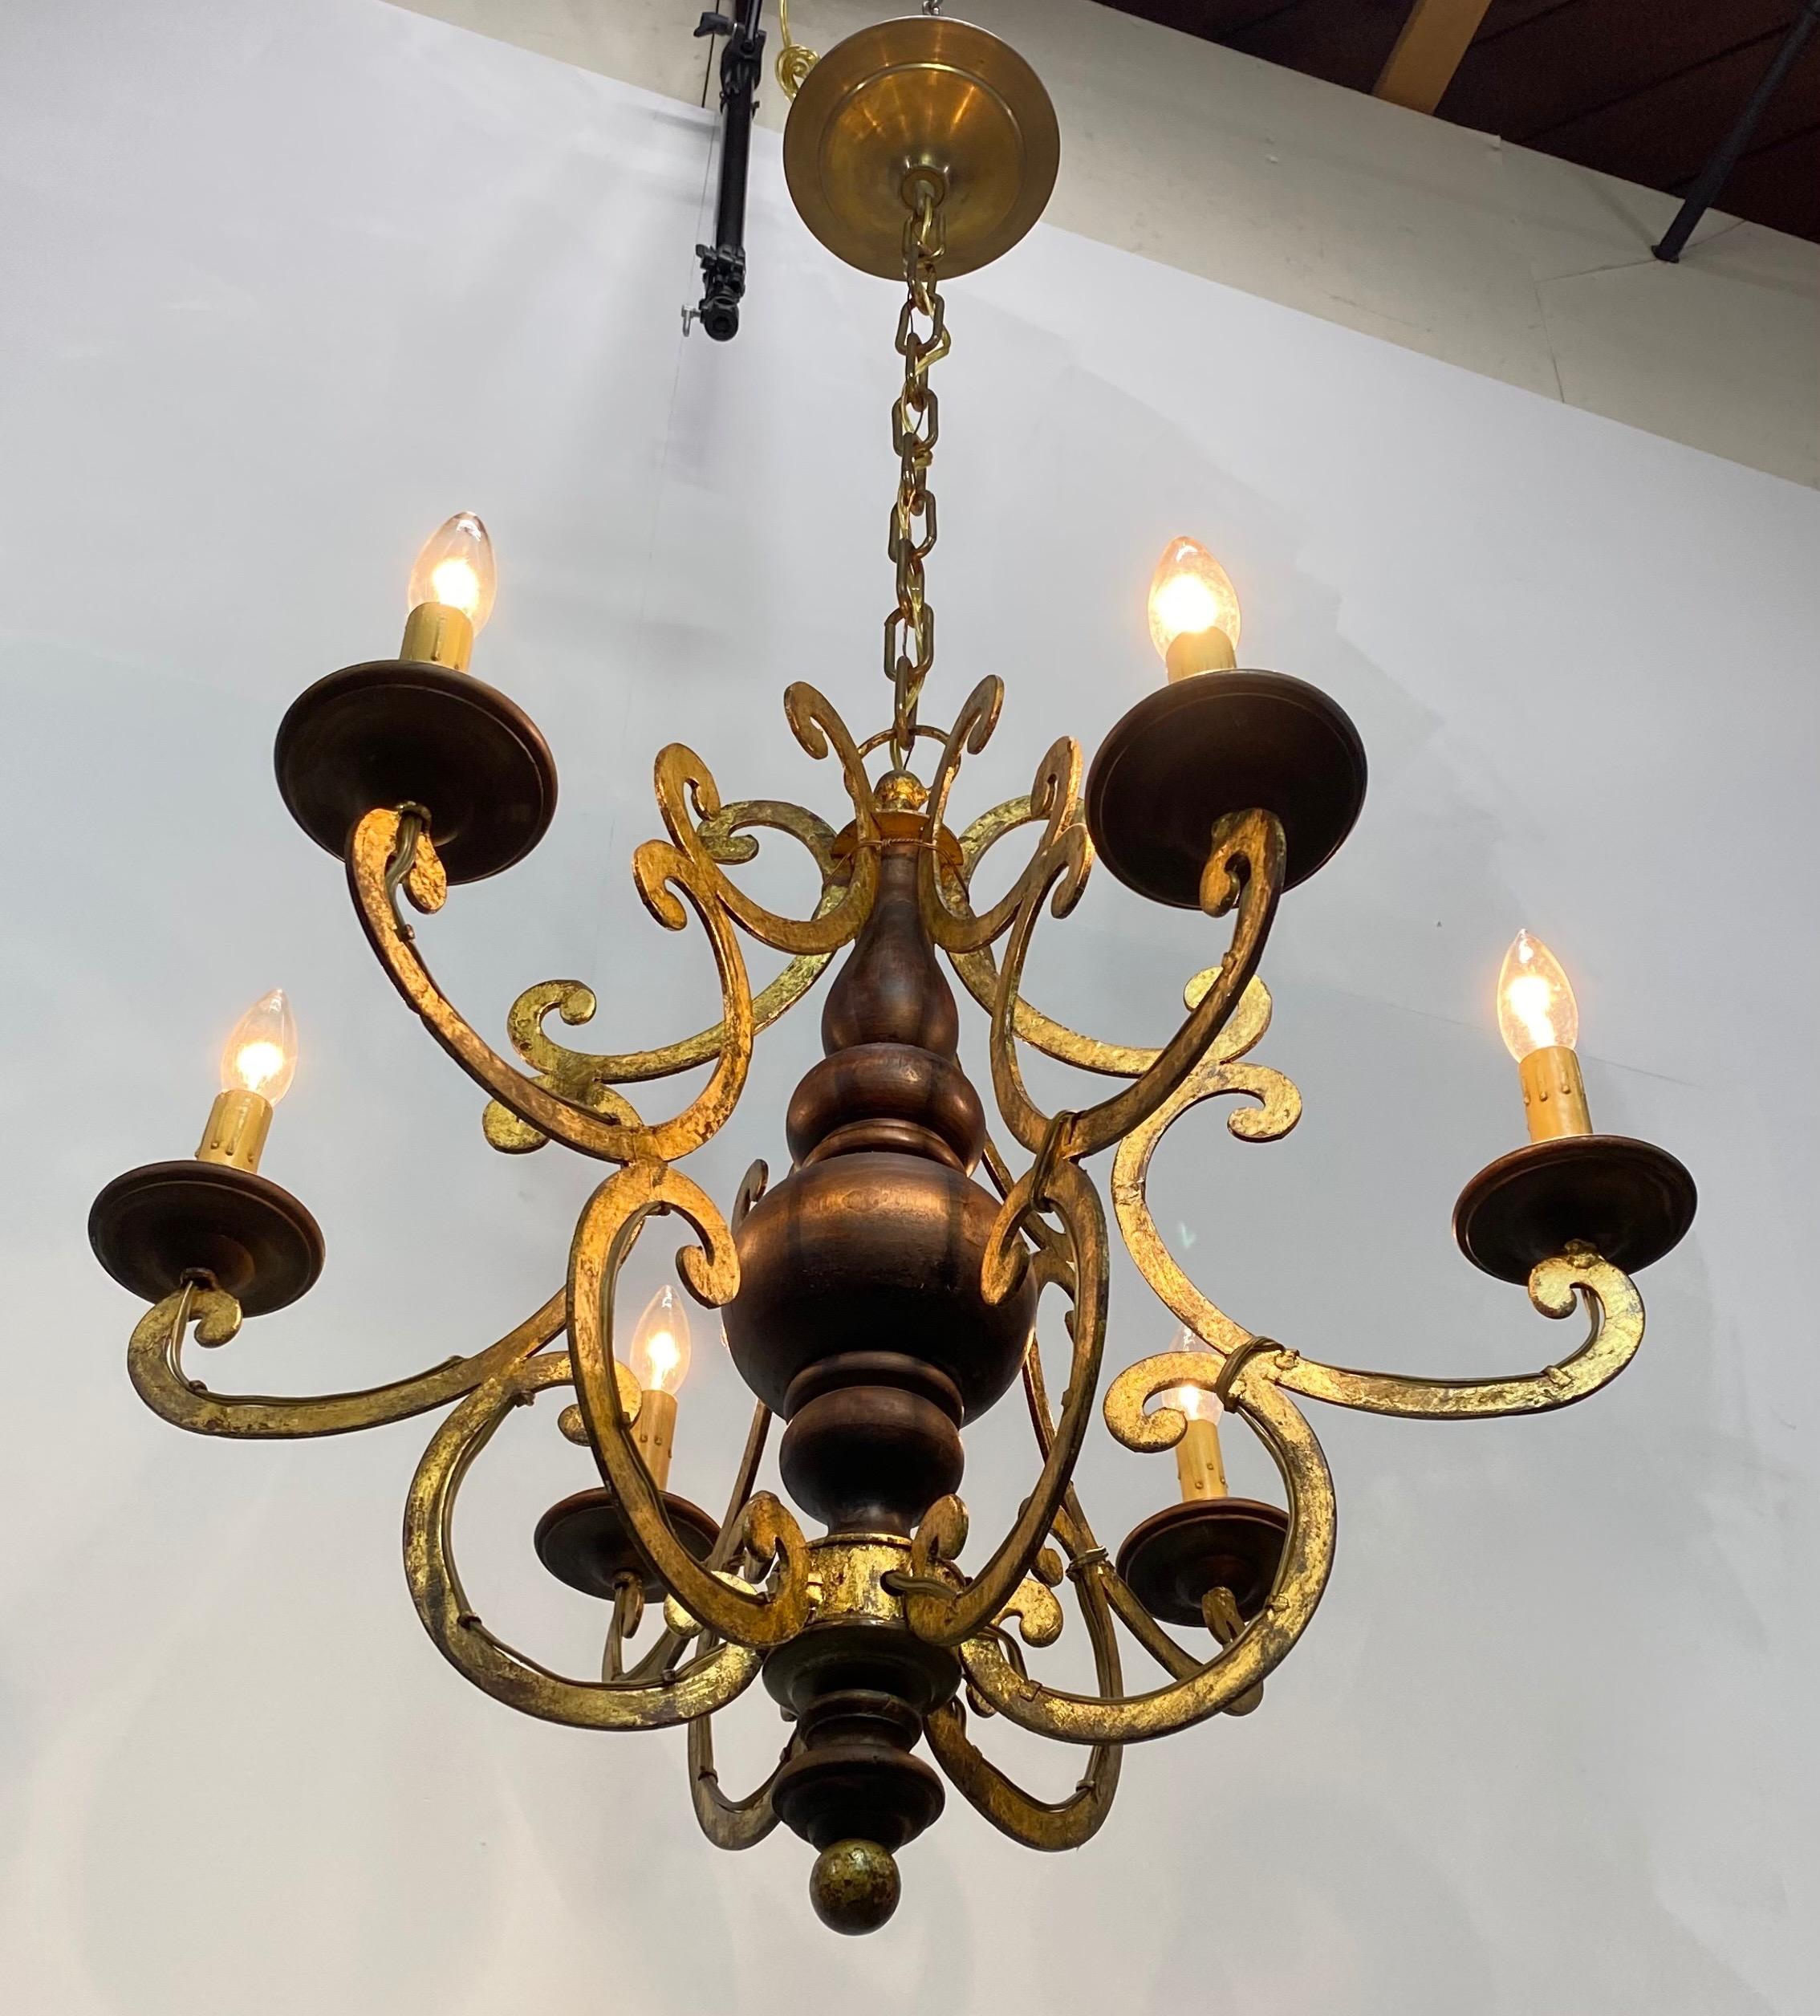 Italian Walnut and Wrought Iron Light Fixture, 1960's For Sale 1